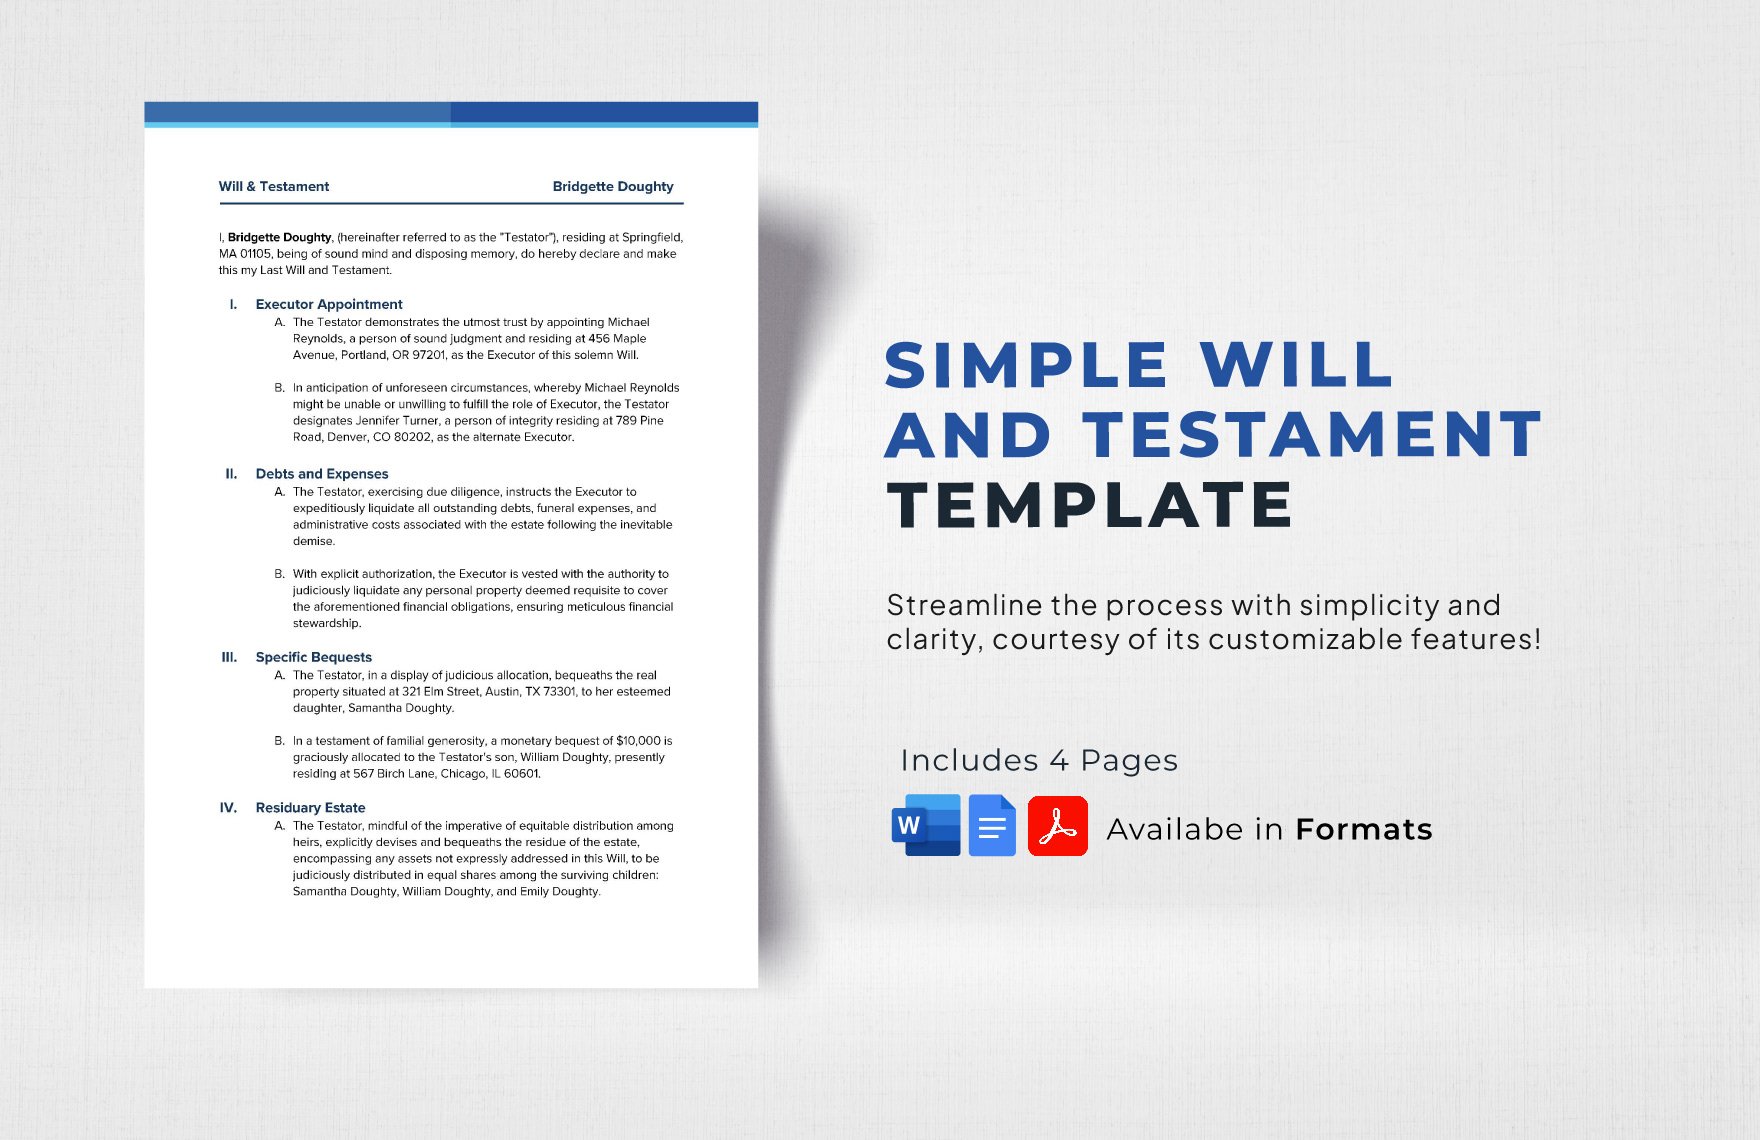 Simple Will and Testament Template